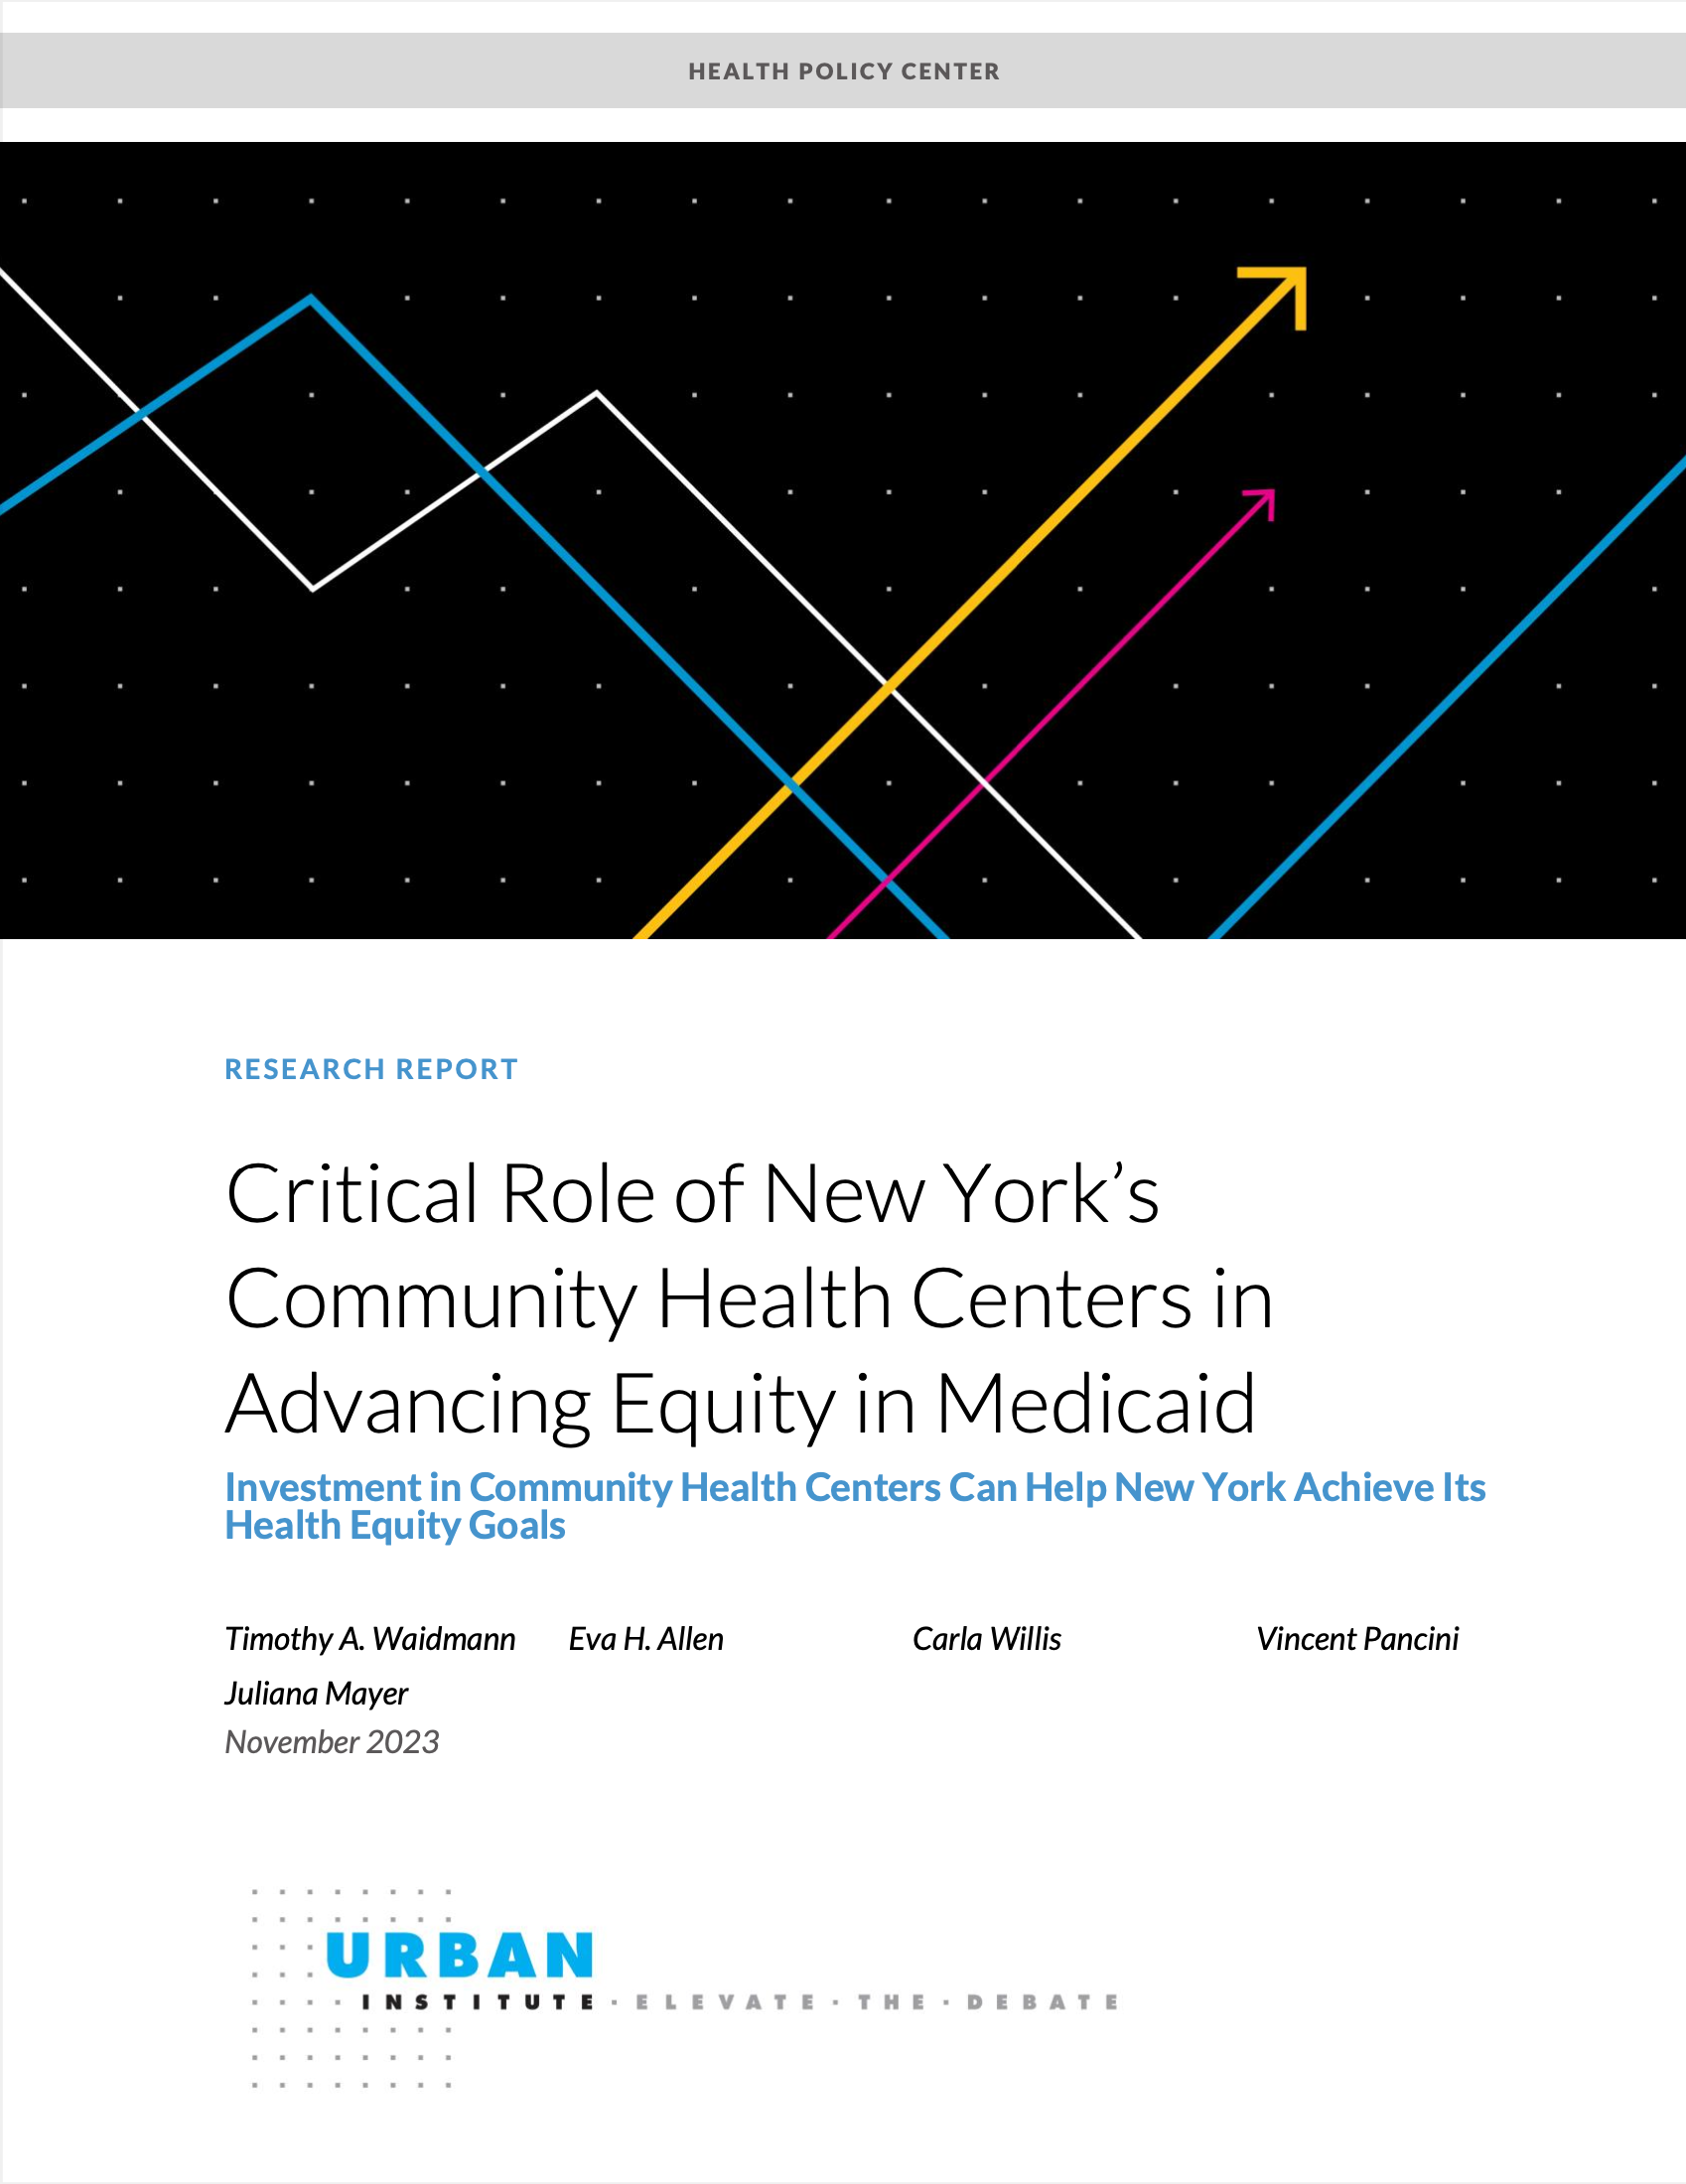 Critical Role of New York's Community Health Centers in Advancing Equity in Medicaid